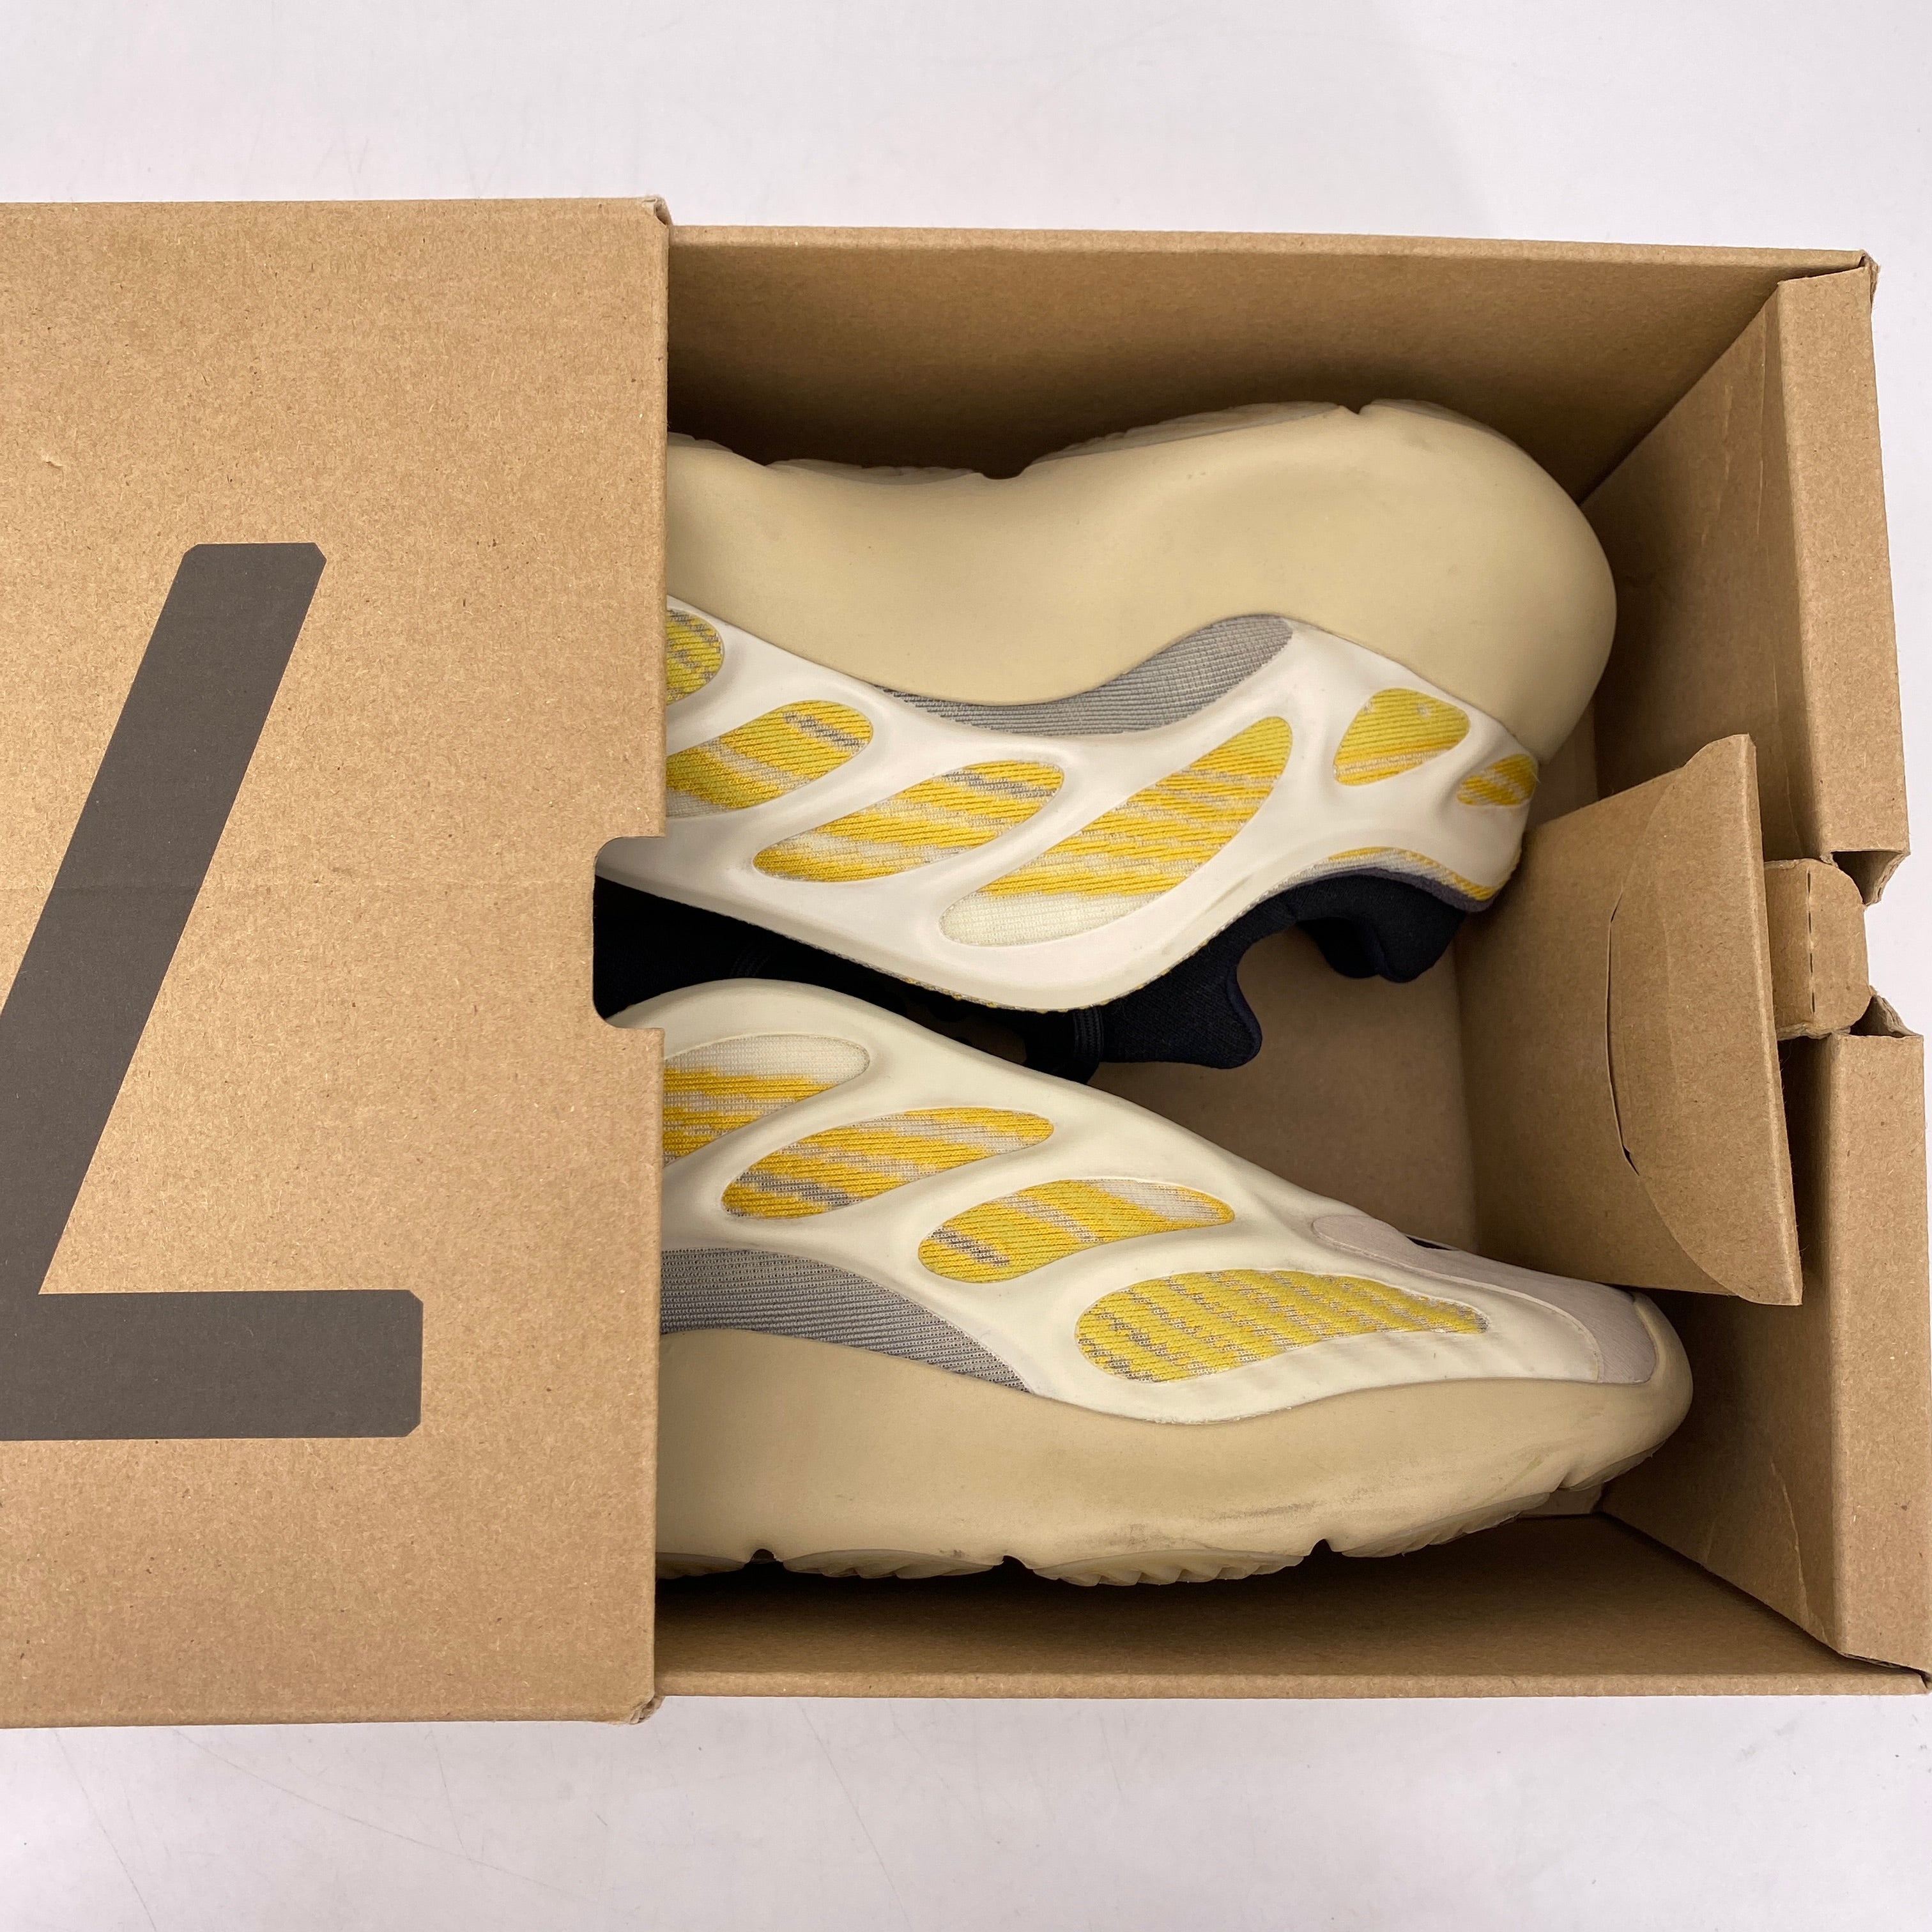 Yeezy 700 v3 &quot;Safflower&quot; 2020 Used Size 8